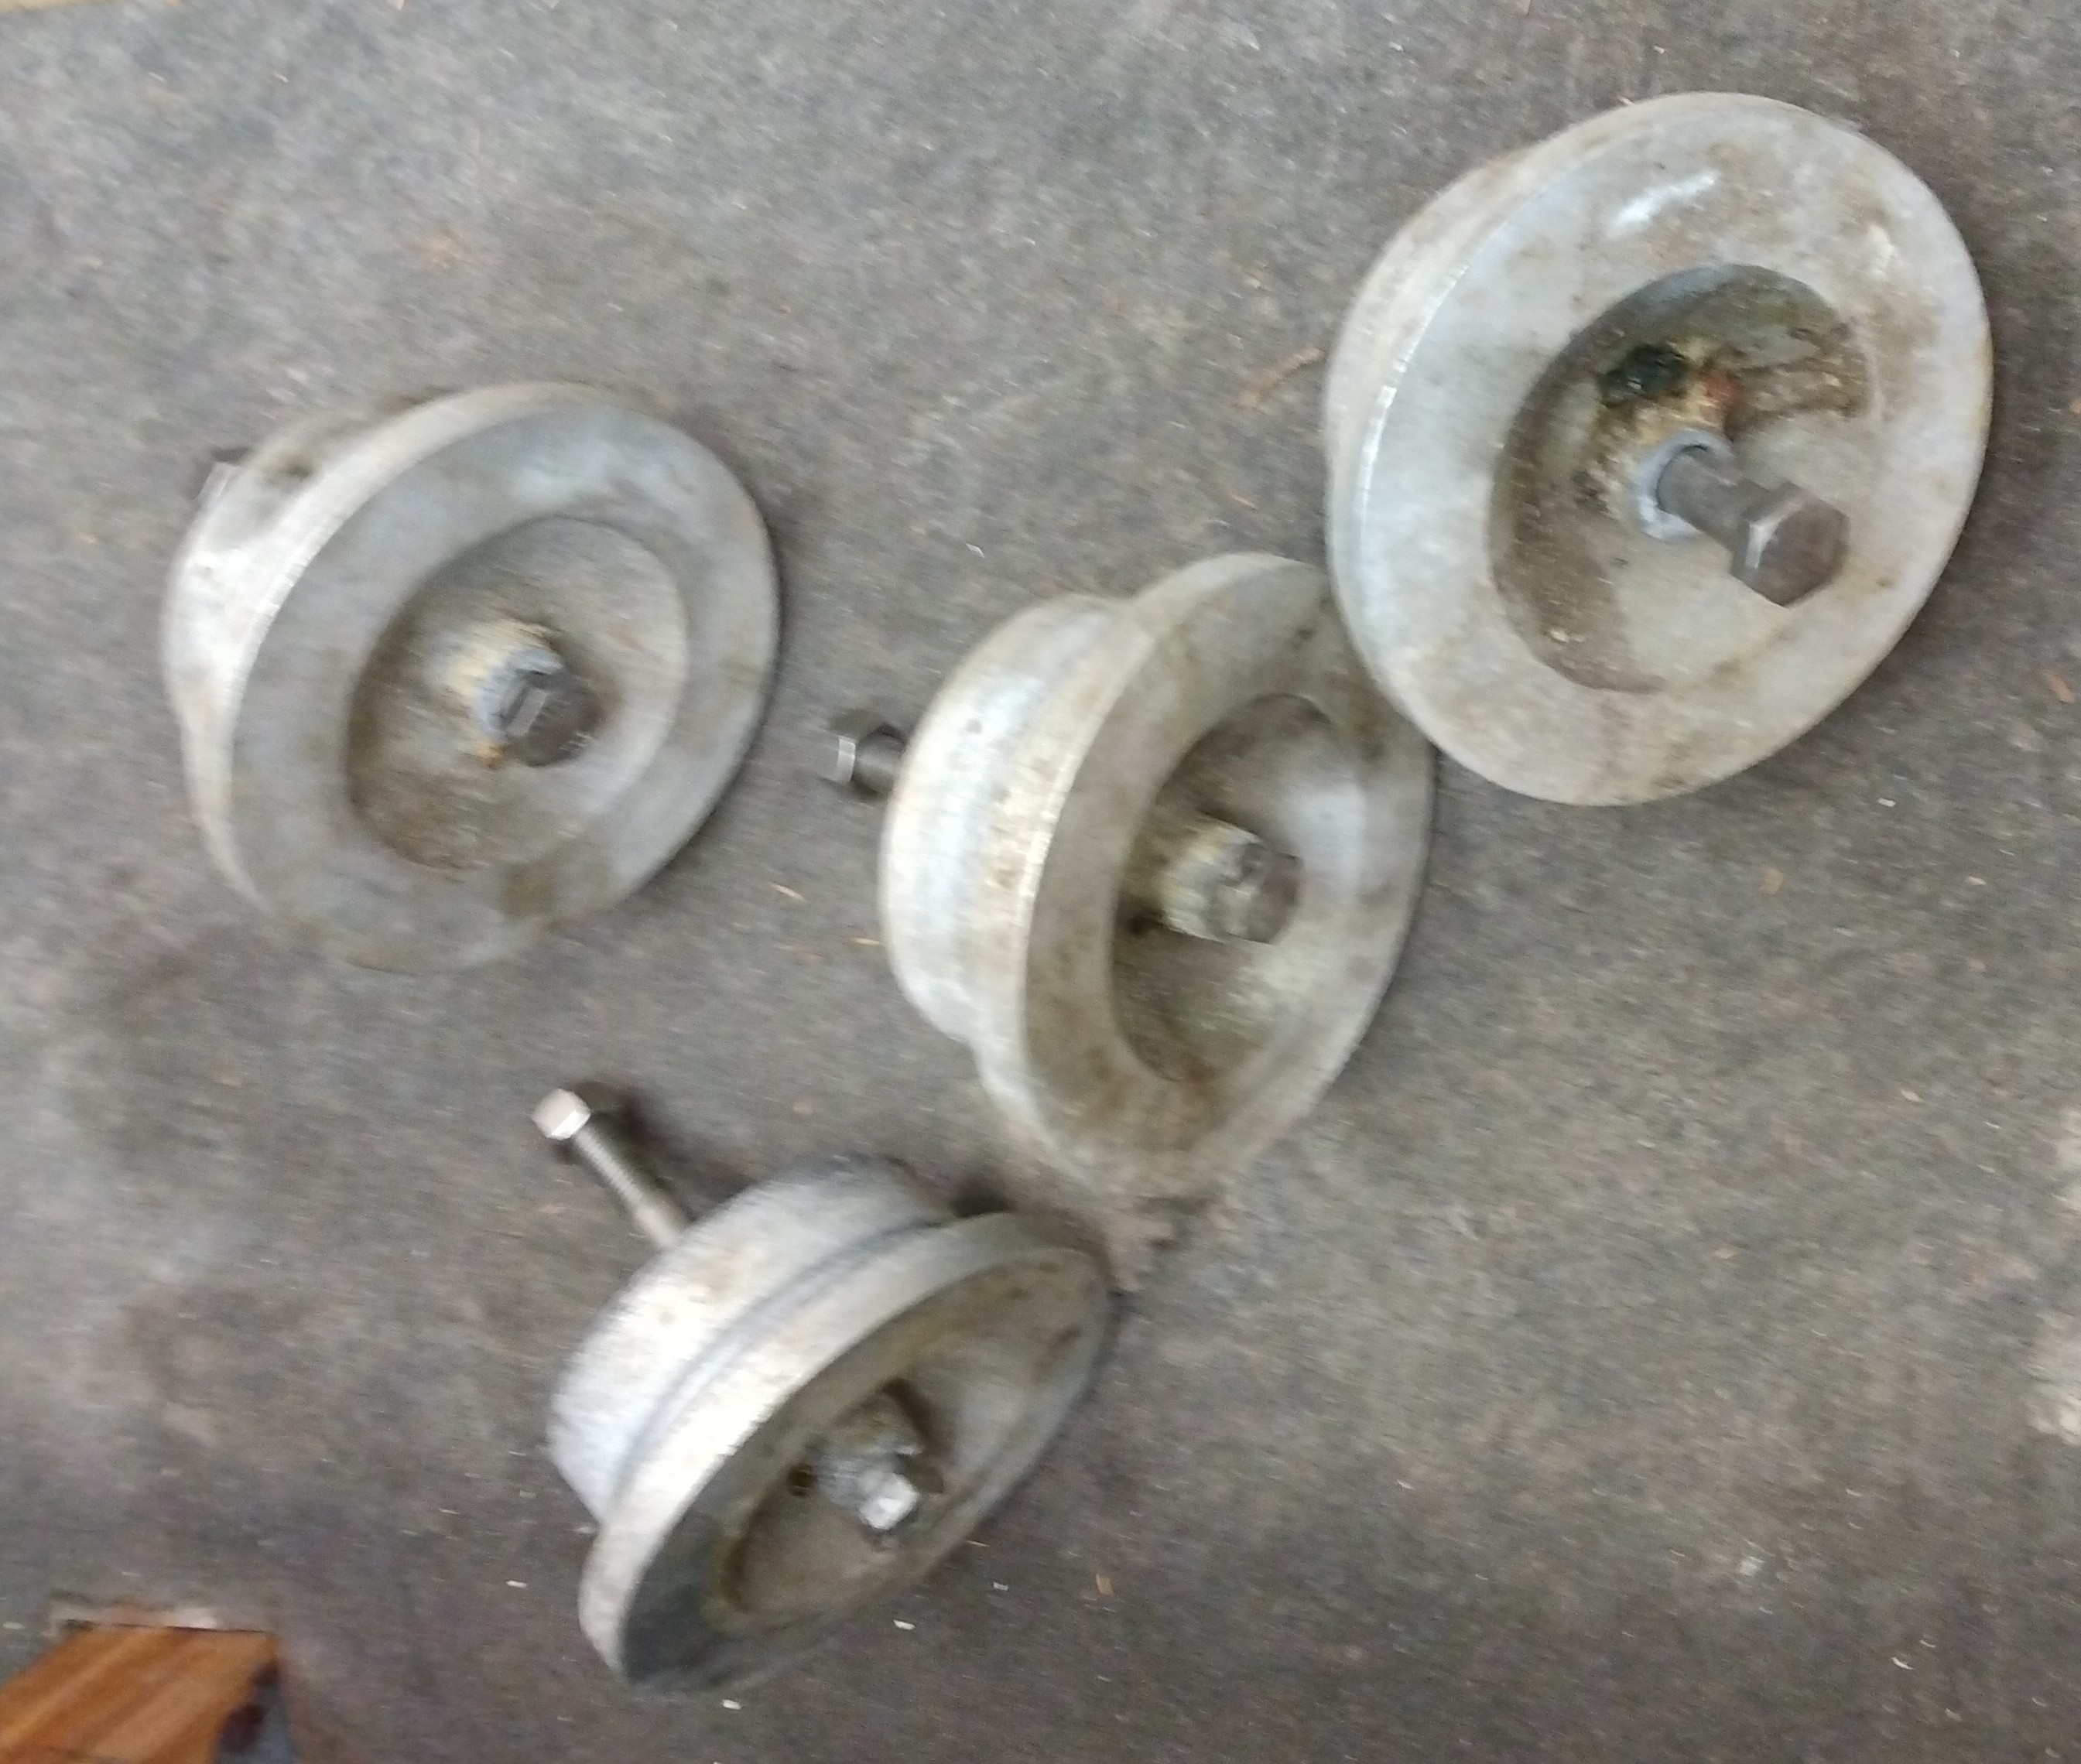 Four cast aluminum wheels for the boat-trolley